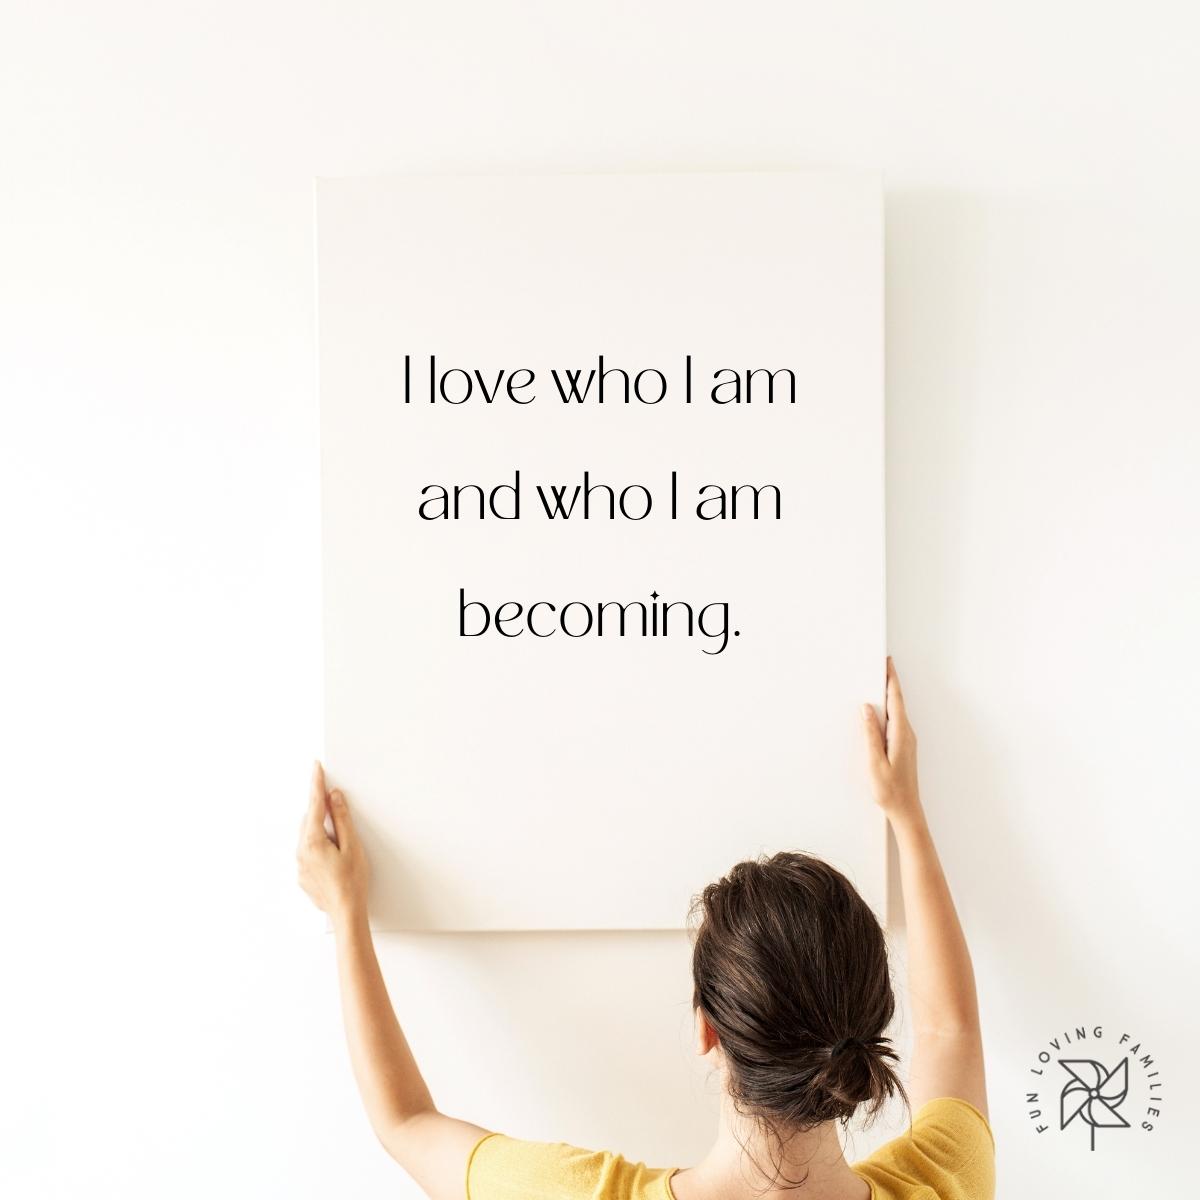 I love who I am and who I am becoming affirmation image.